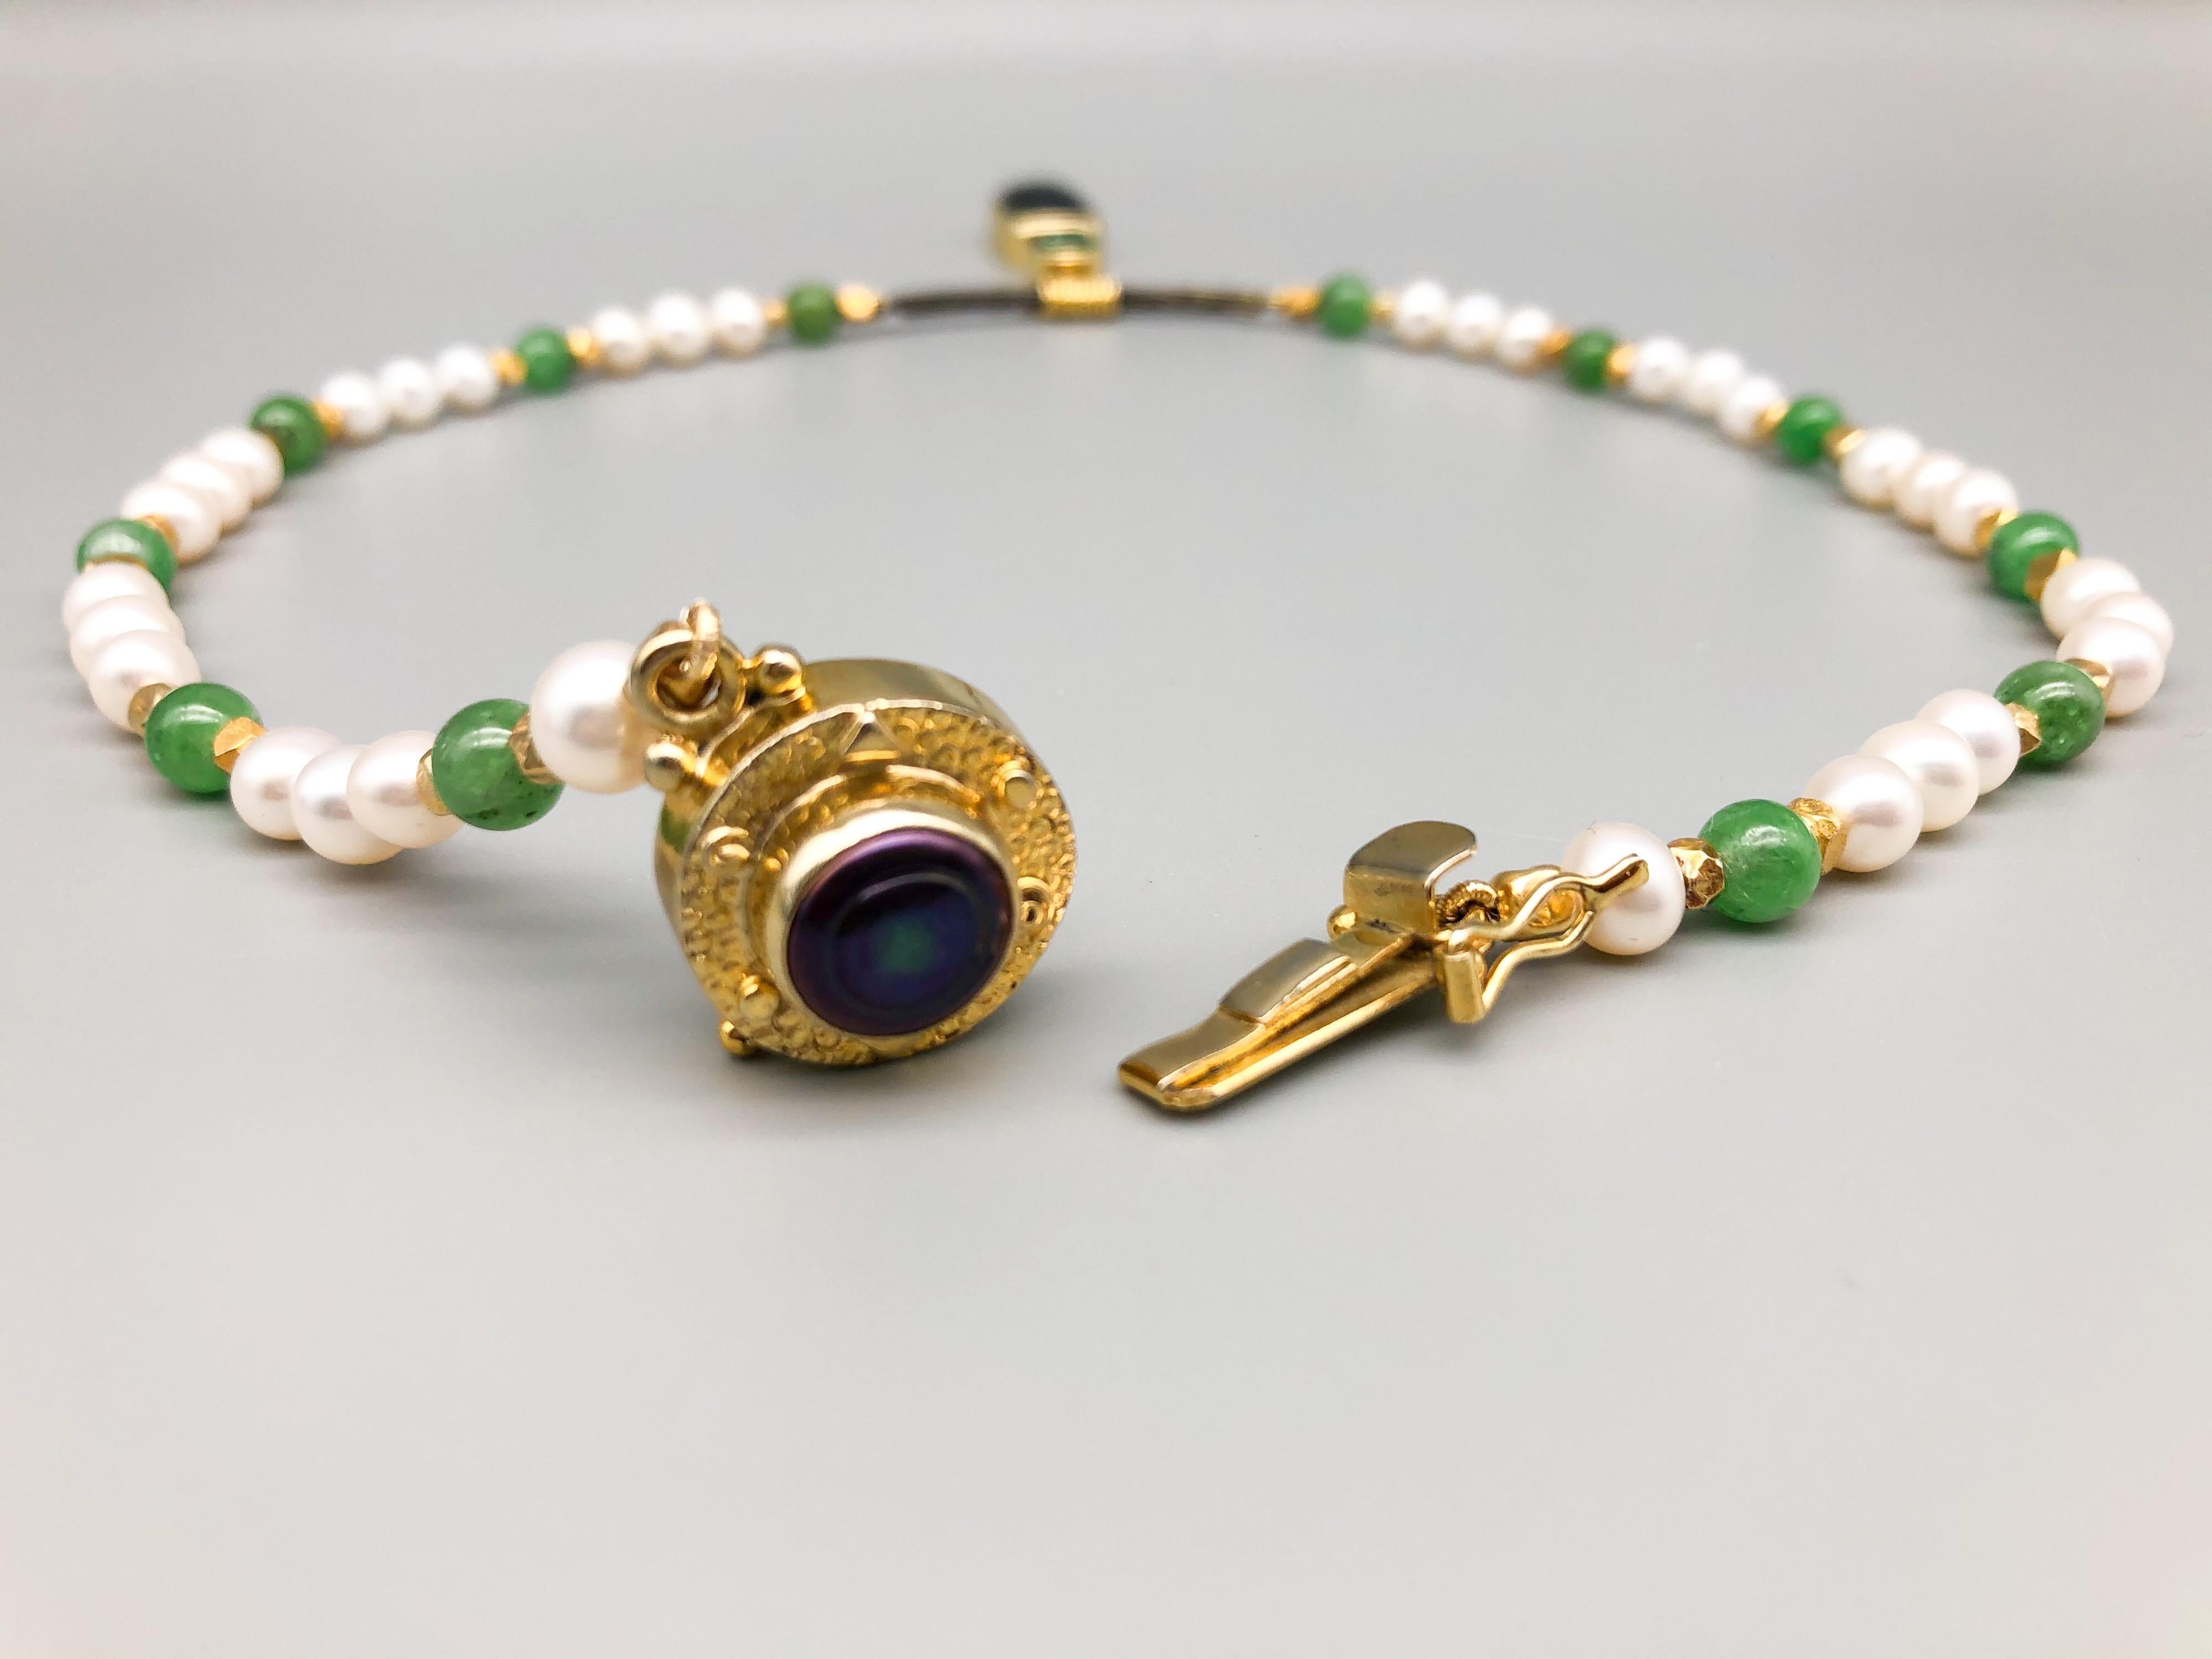 A.Jeschel Pendant Necklace with Pearls and Emerald beads is dreamy. For Sale 2